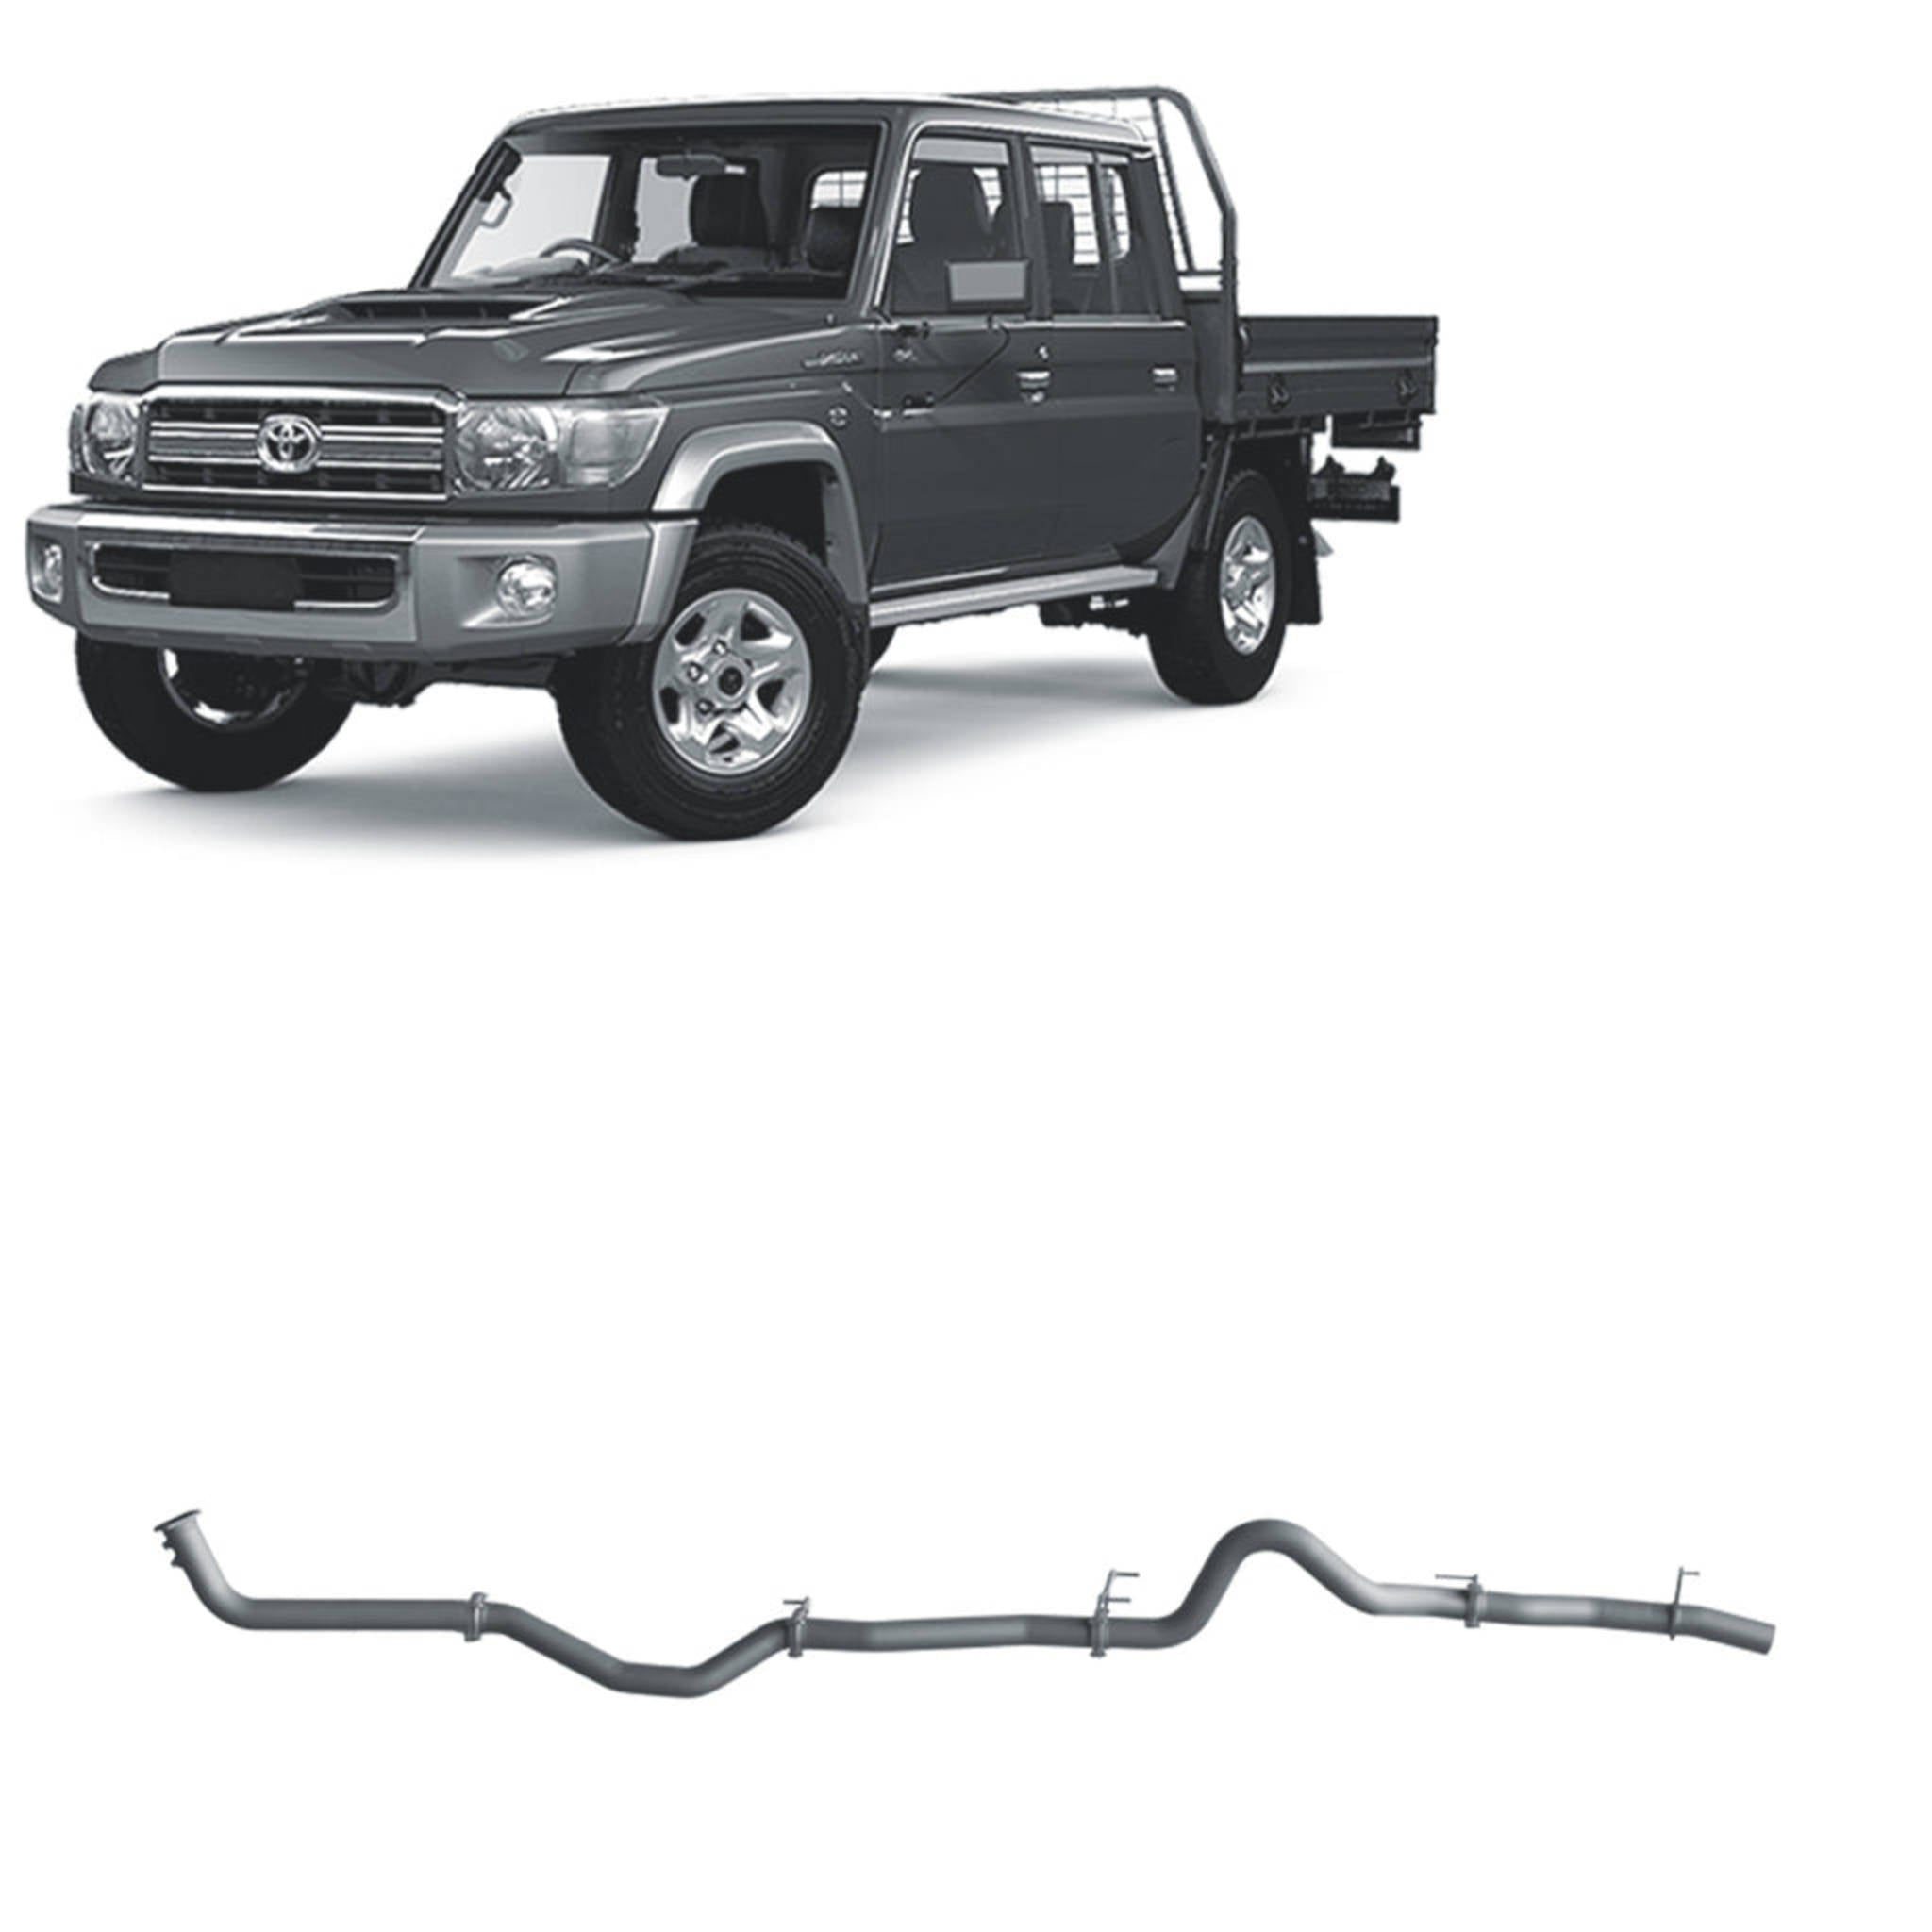 Redback Extreme Duty Exhaust to suit Toyota Landcruiser 79 Series with Auxiliary Fuel Tank (11/2016 onwards)